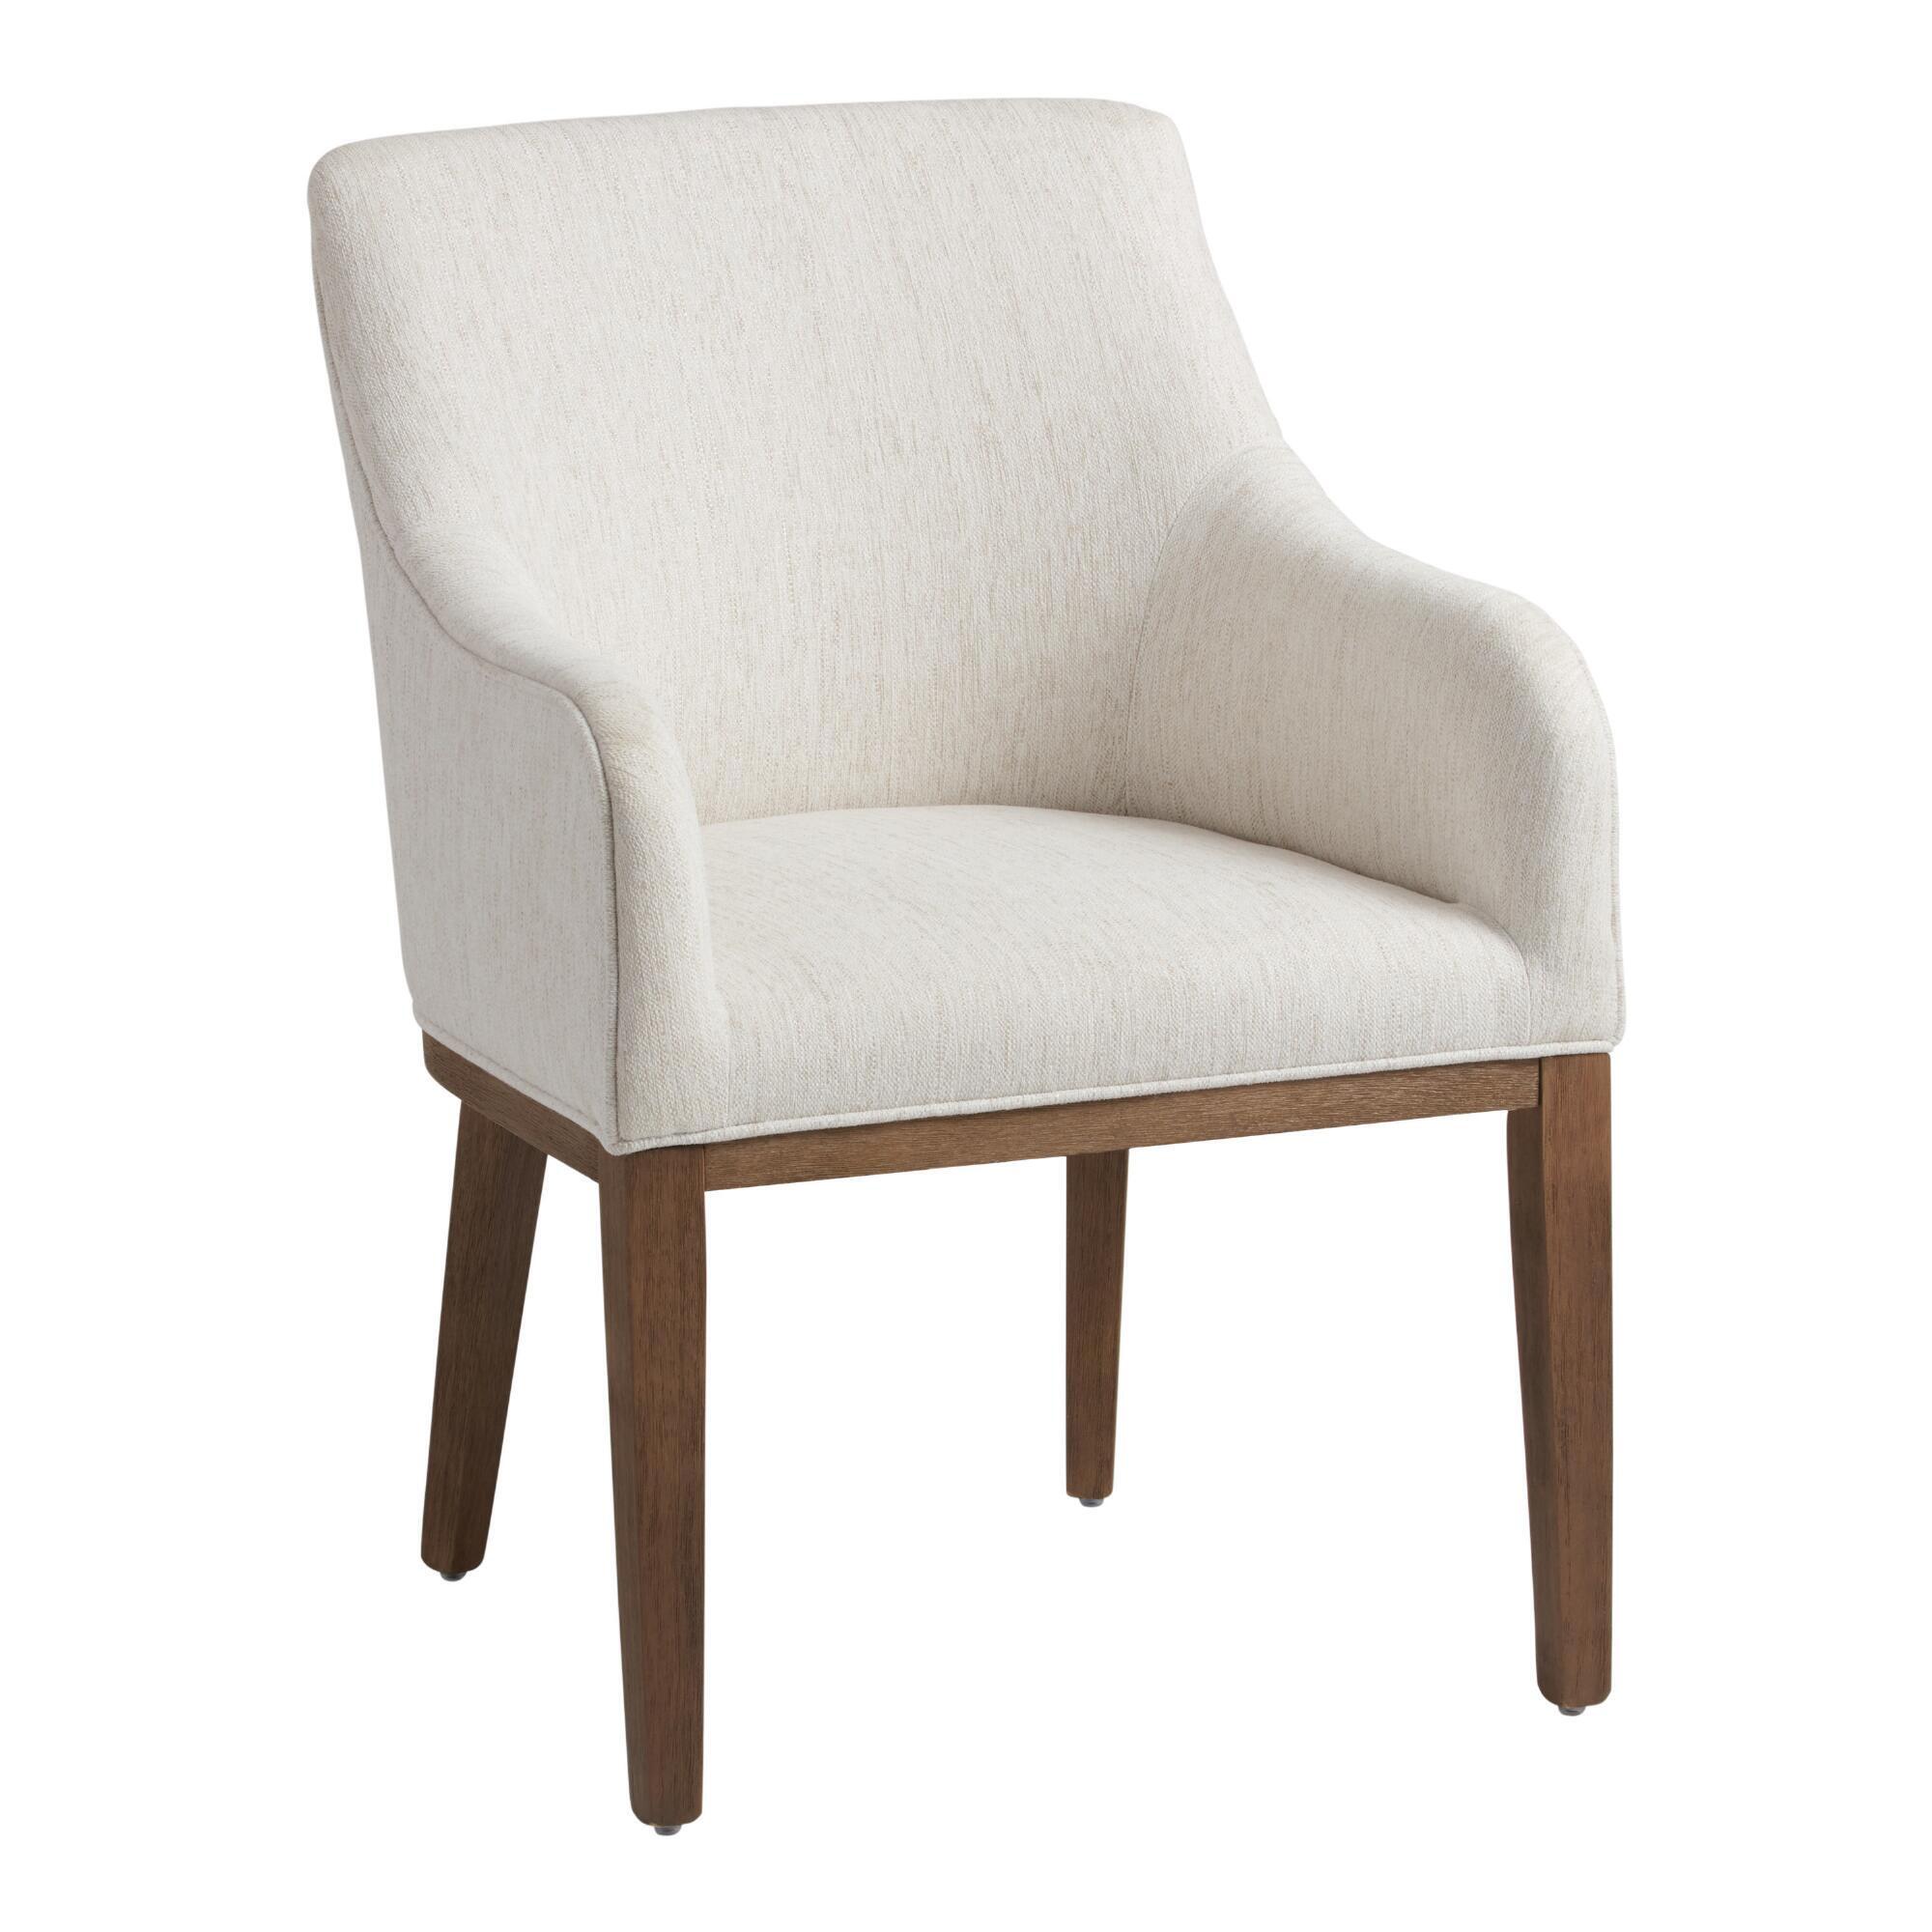 Arden Upholstered Dining Armchair: Natural/Cream - Fabric by World Market